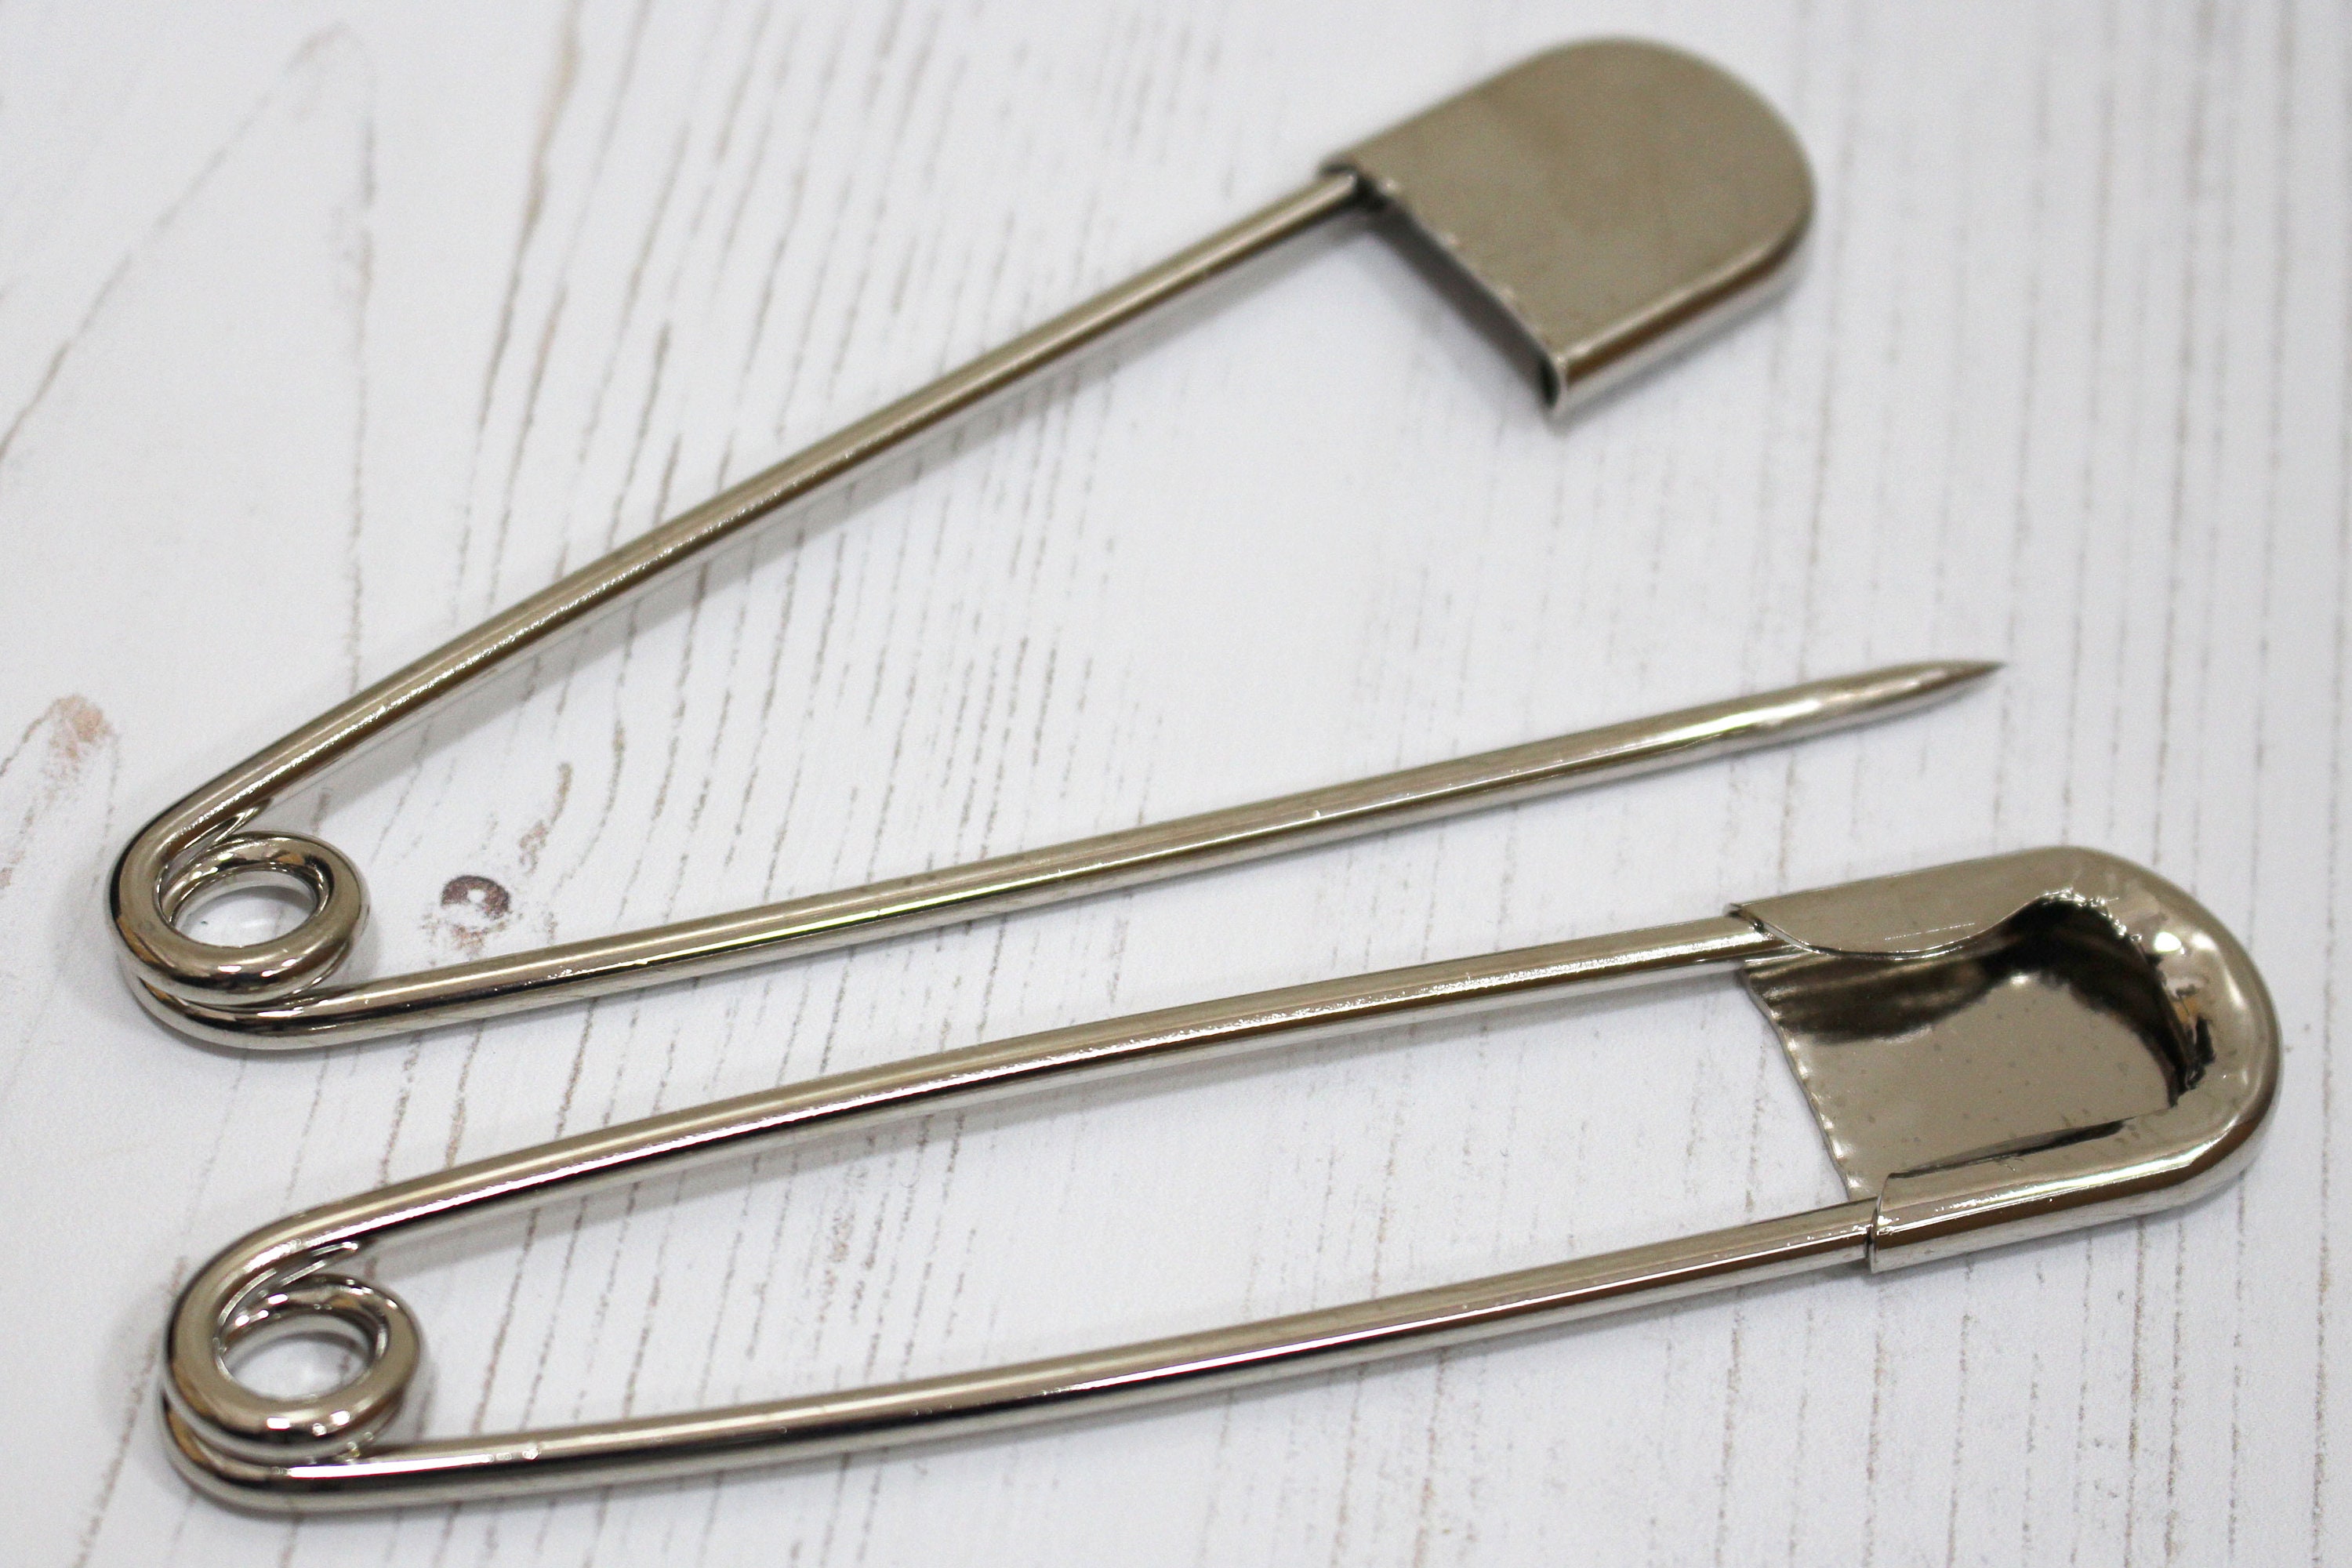 Large Safety Pins, 5 Inch Safety Pins, 10 Pcs Stainless Steel